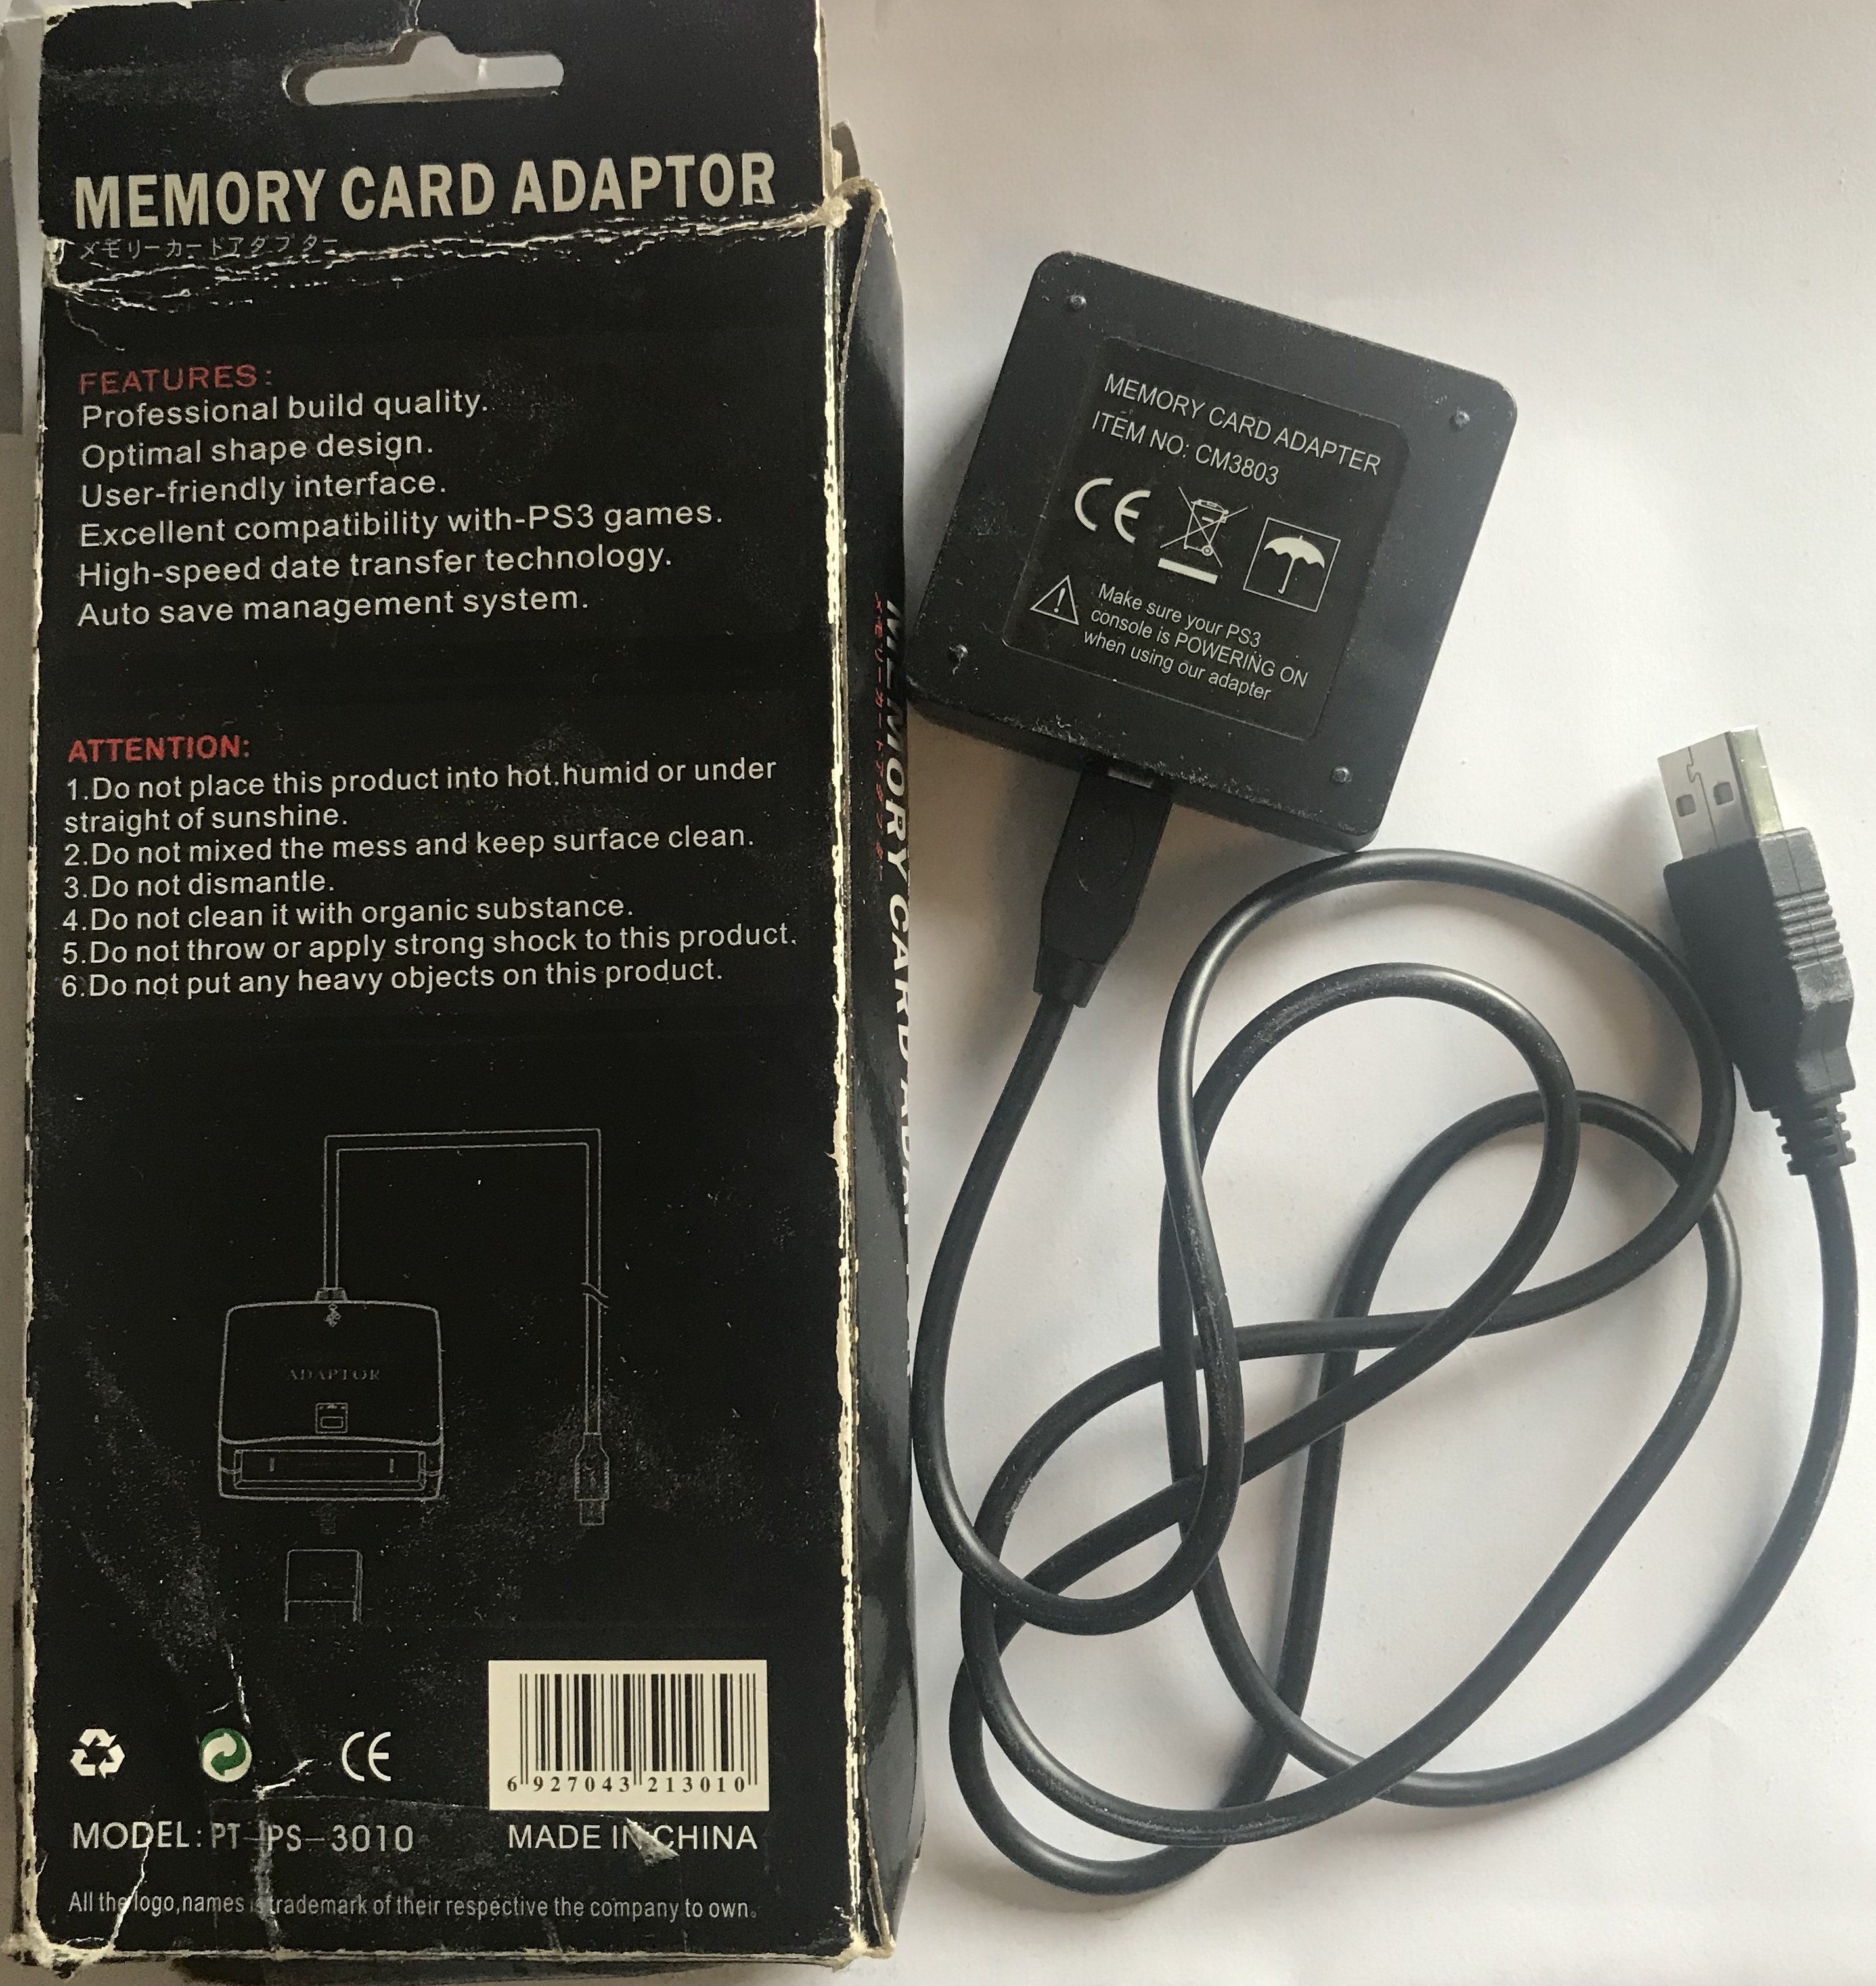 photo of the back of the packaging for a ”Memory Card Adaptor” and the device itself, which is a small black box connected to a USB cable